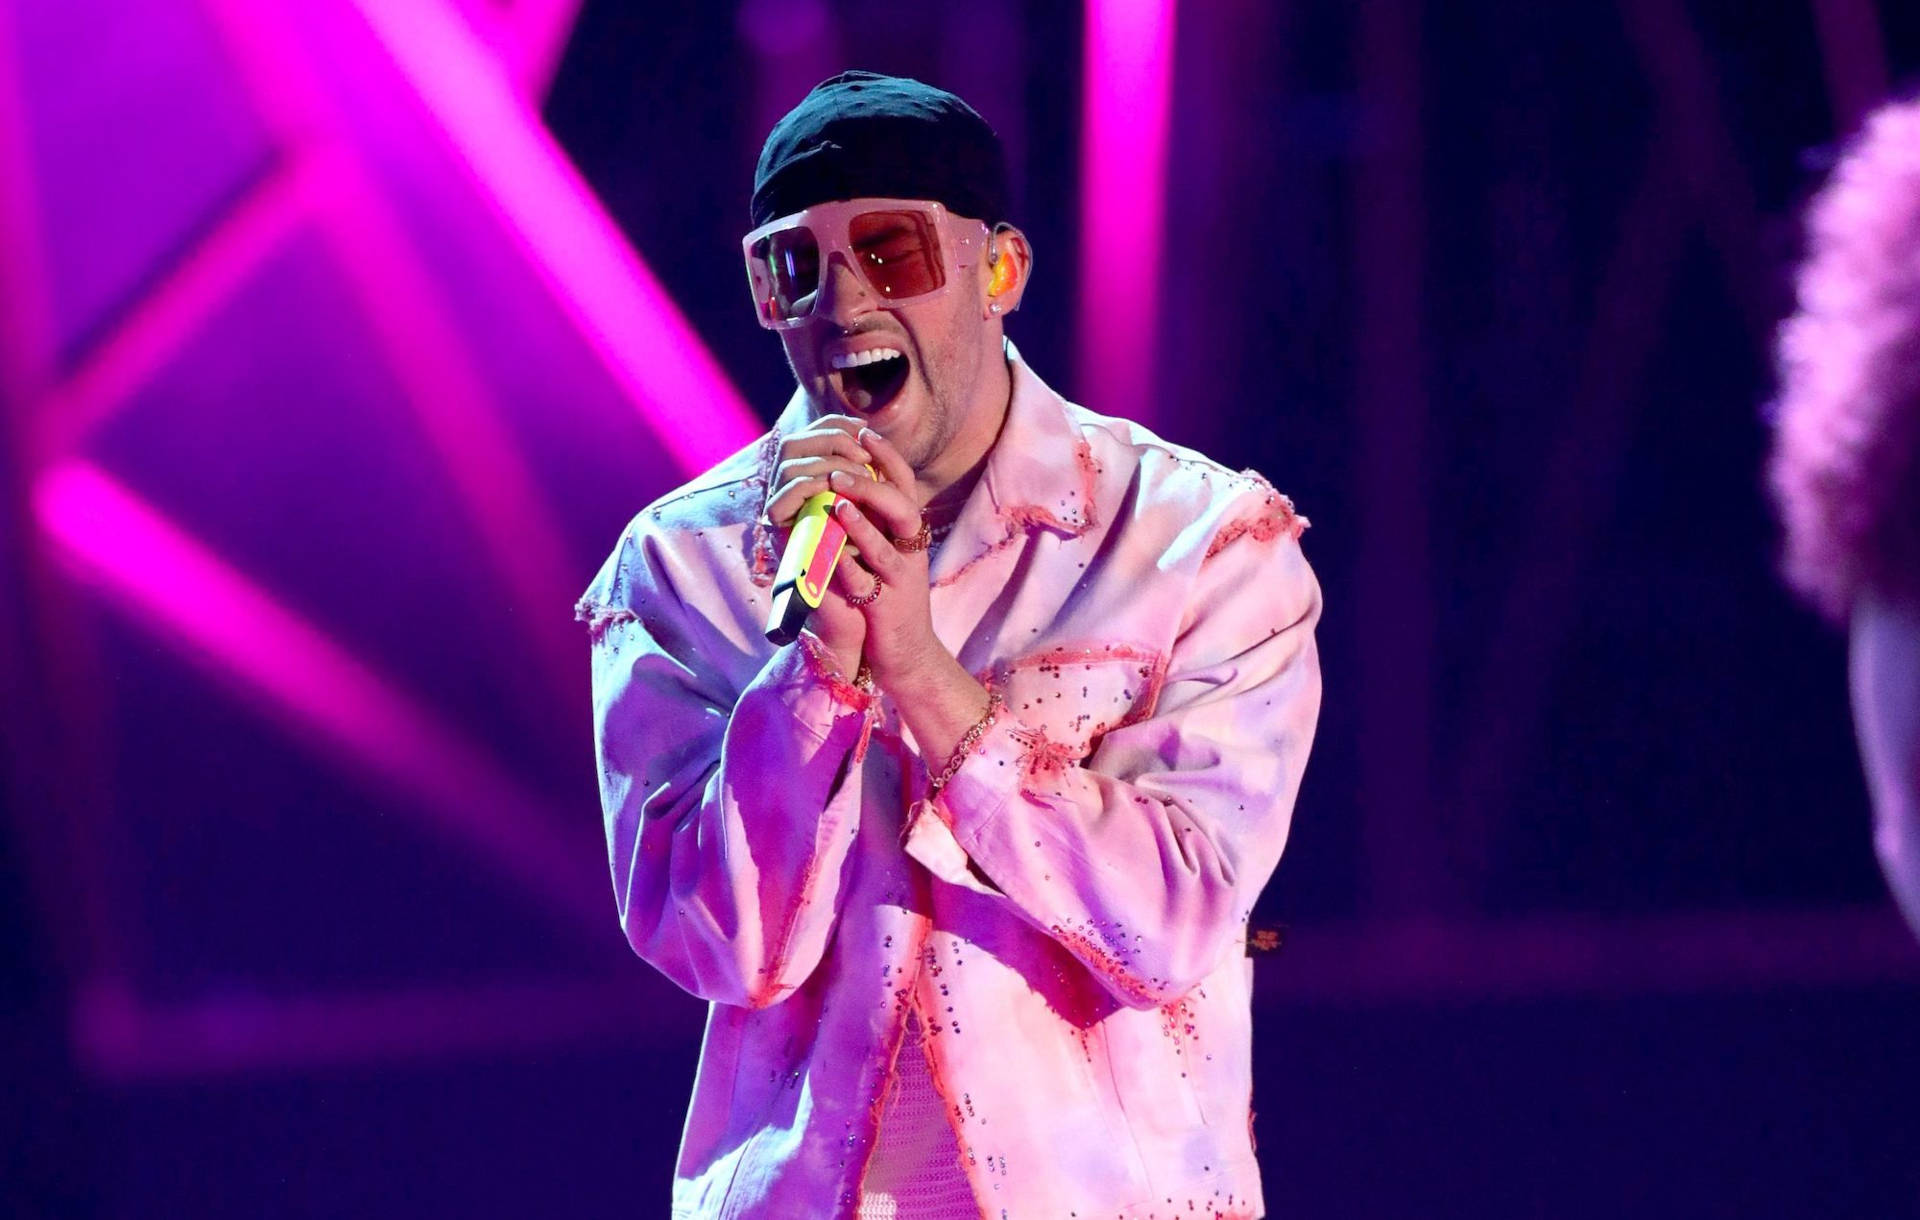 Bad Bunny Performing On Stage Wallpaper